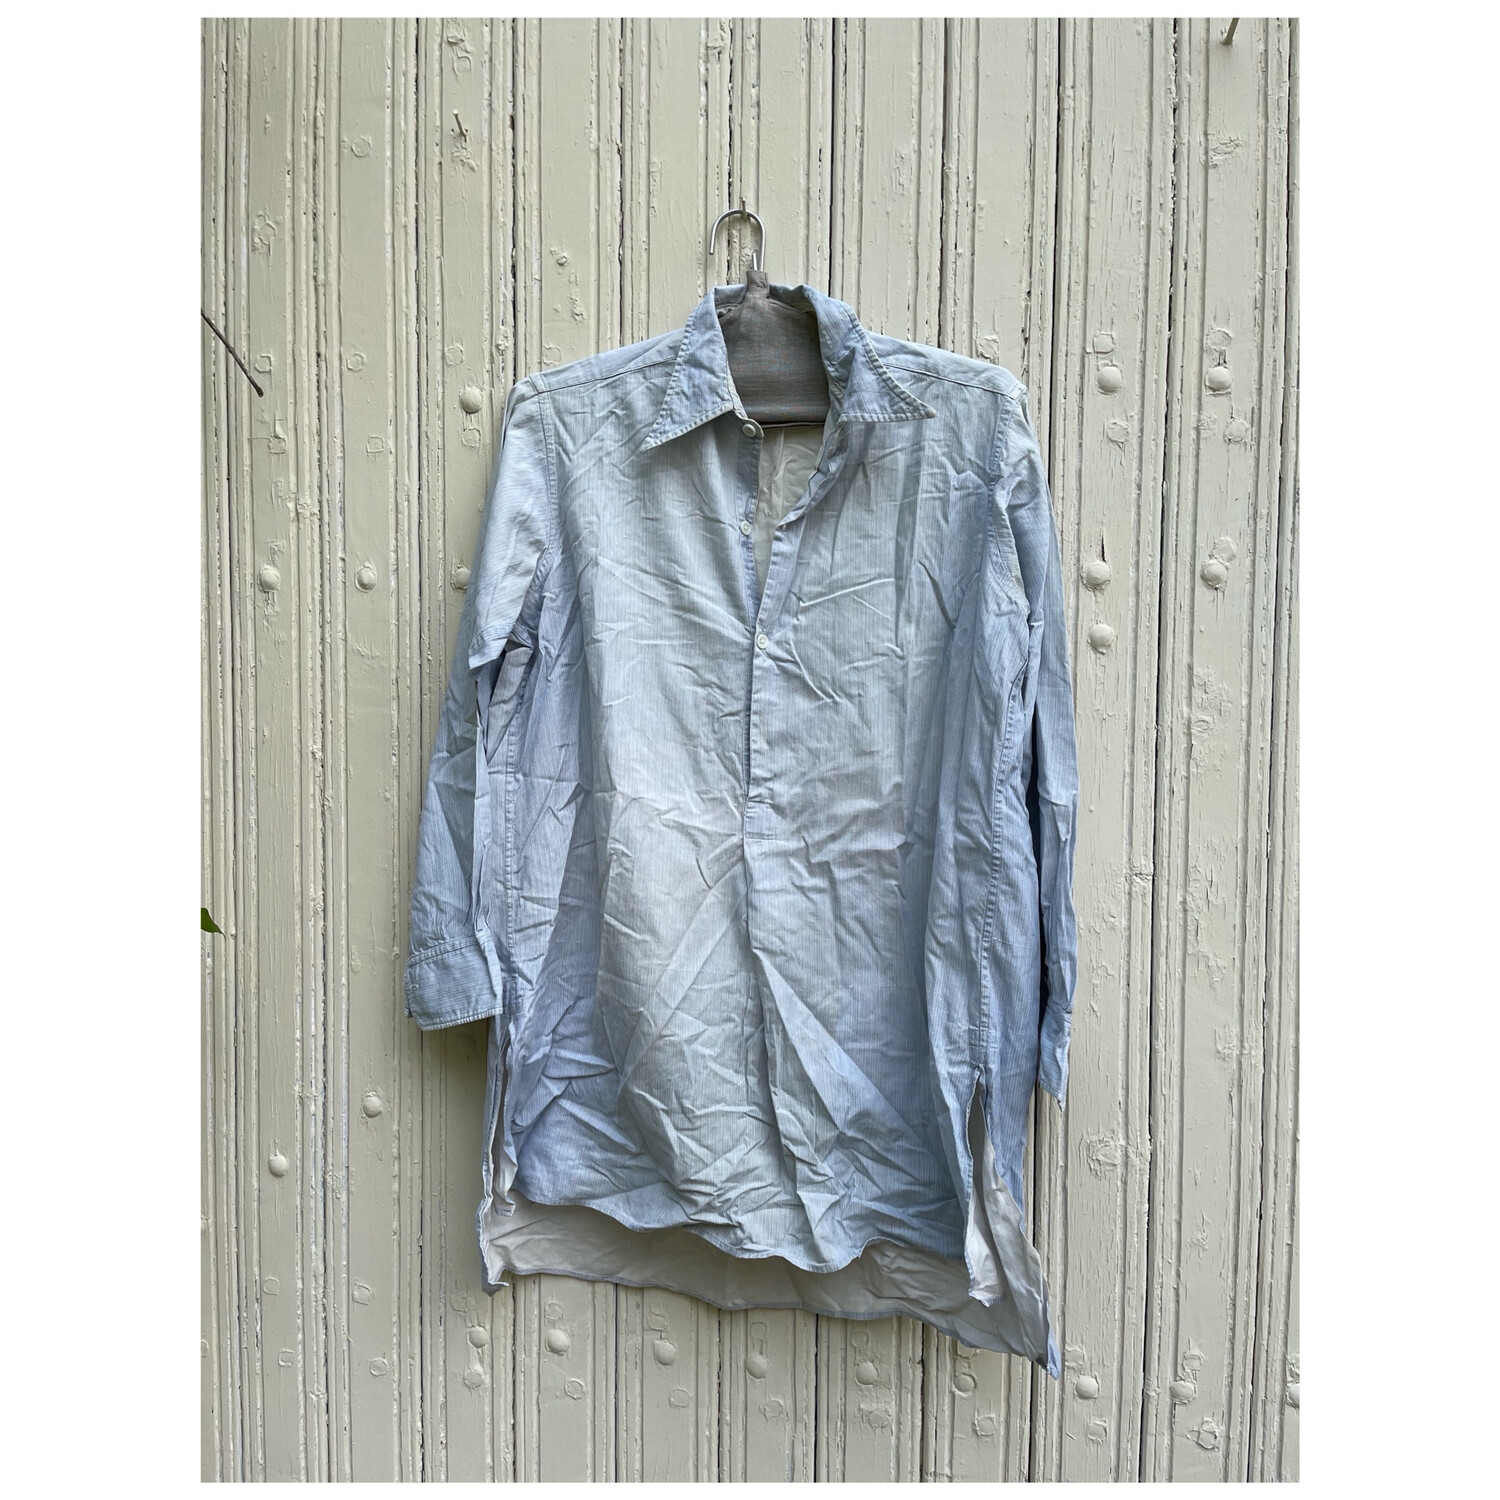 Old French Work Shirt